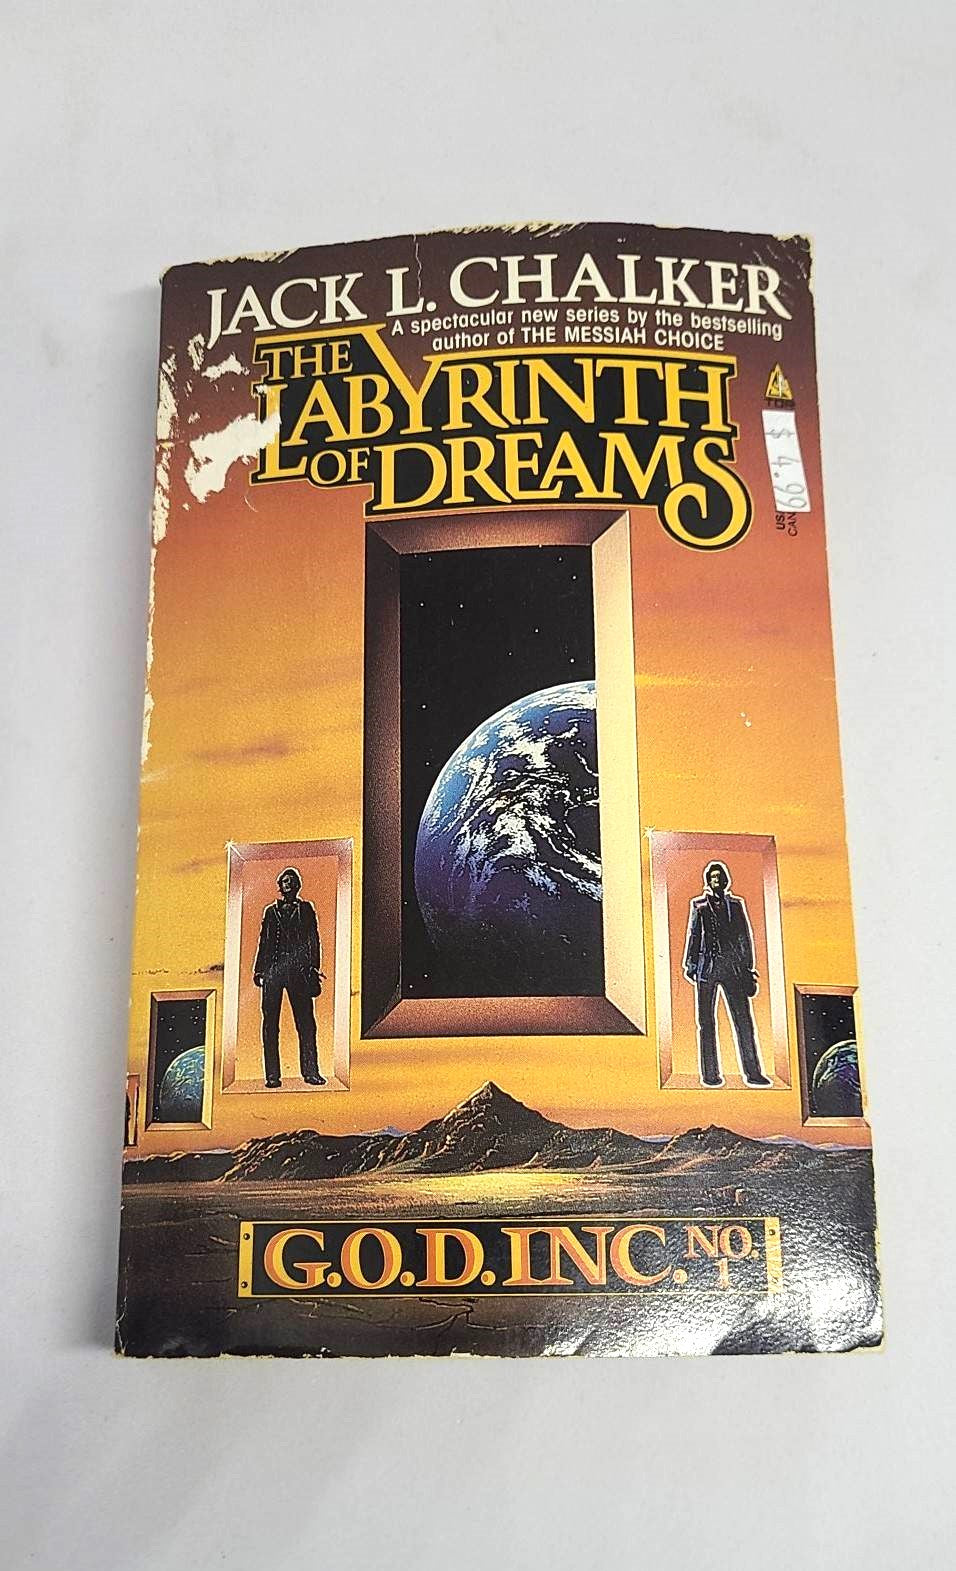 The Labyrinth of Dreams - G.O.D. INC. NO. 1 by Jack L. Chalker